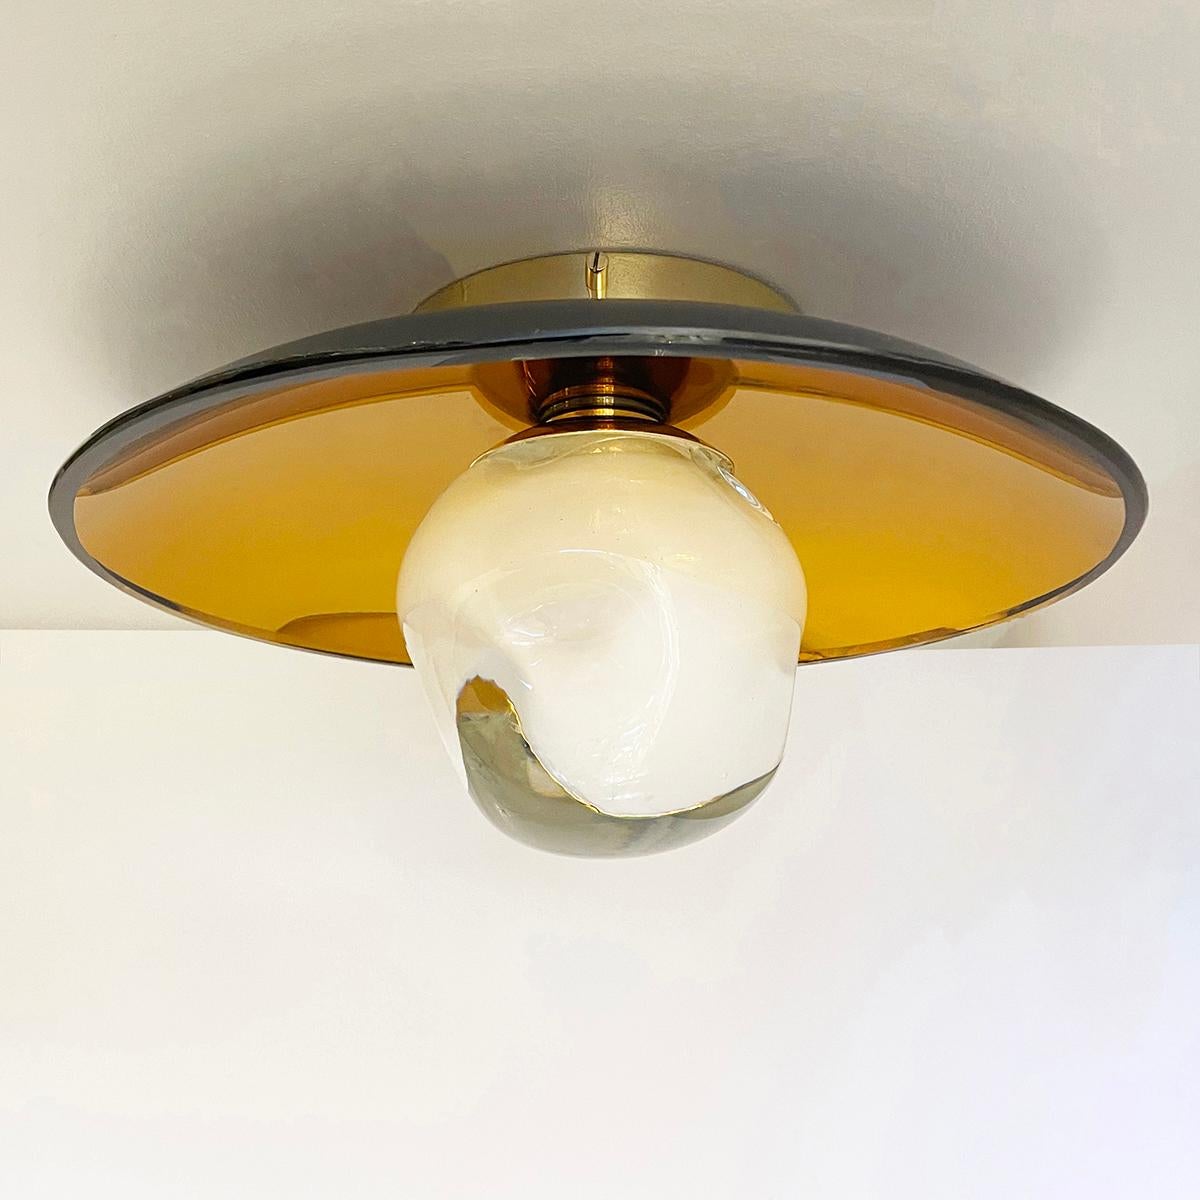 The versatile Sole light can be installed as a ceiling light or wall light and features our handblown Sfera glass mounted on a colored reflective glass dish. Shown with the amber colored reflective glass and polished brass hardware.

The concave